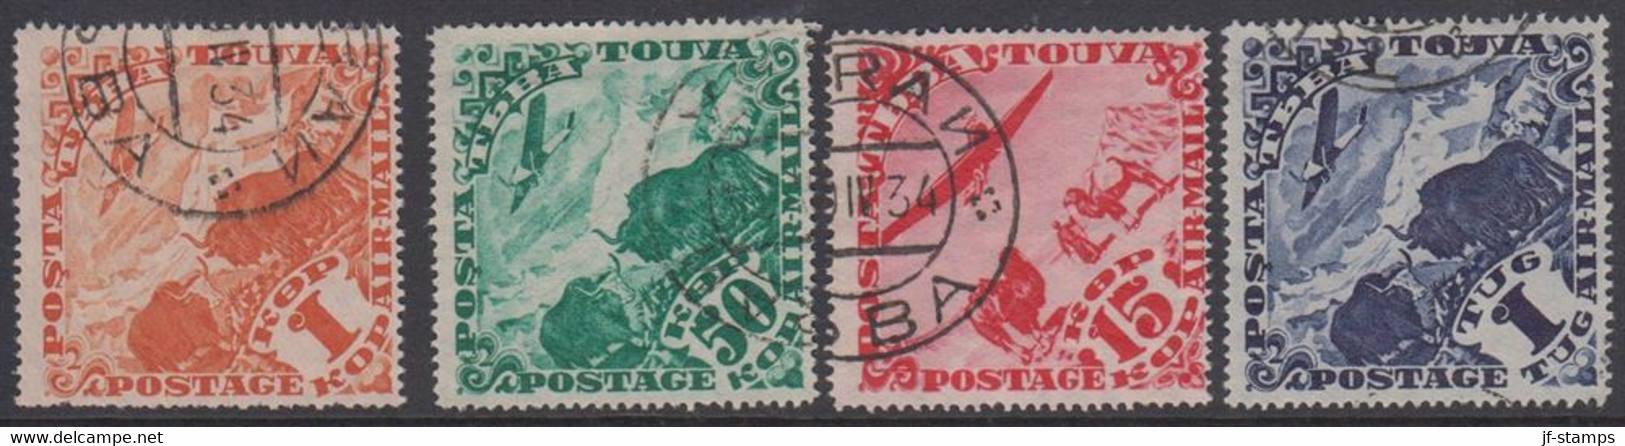 1934. POSTA TOUVA. Selection With 4 AIR MAIL Stamps.  () - JF413767 - Tuva